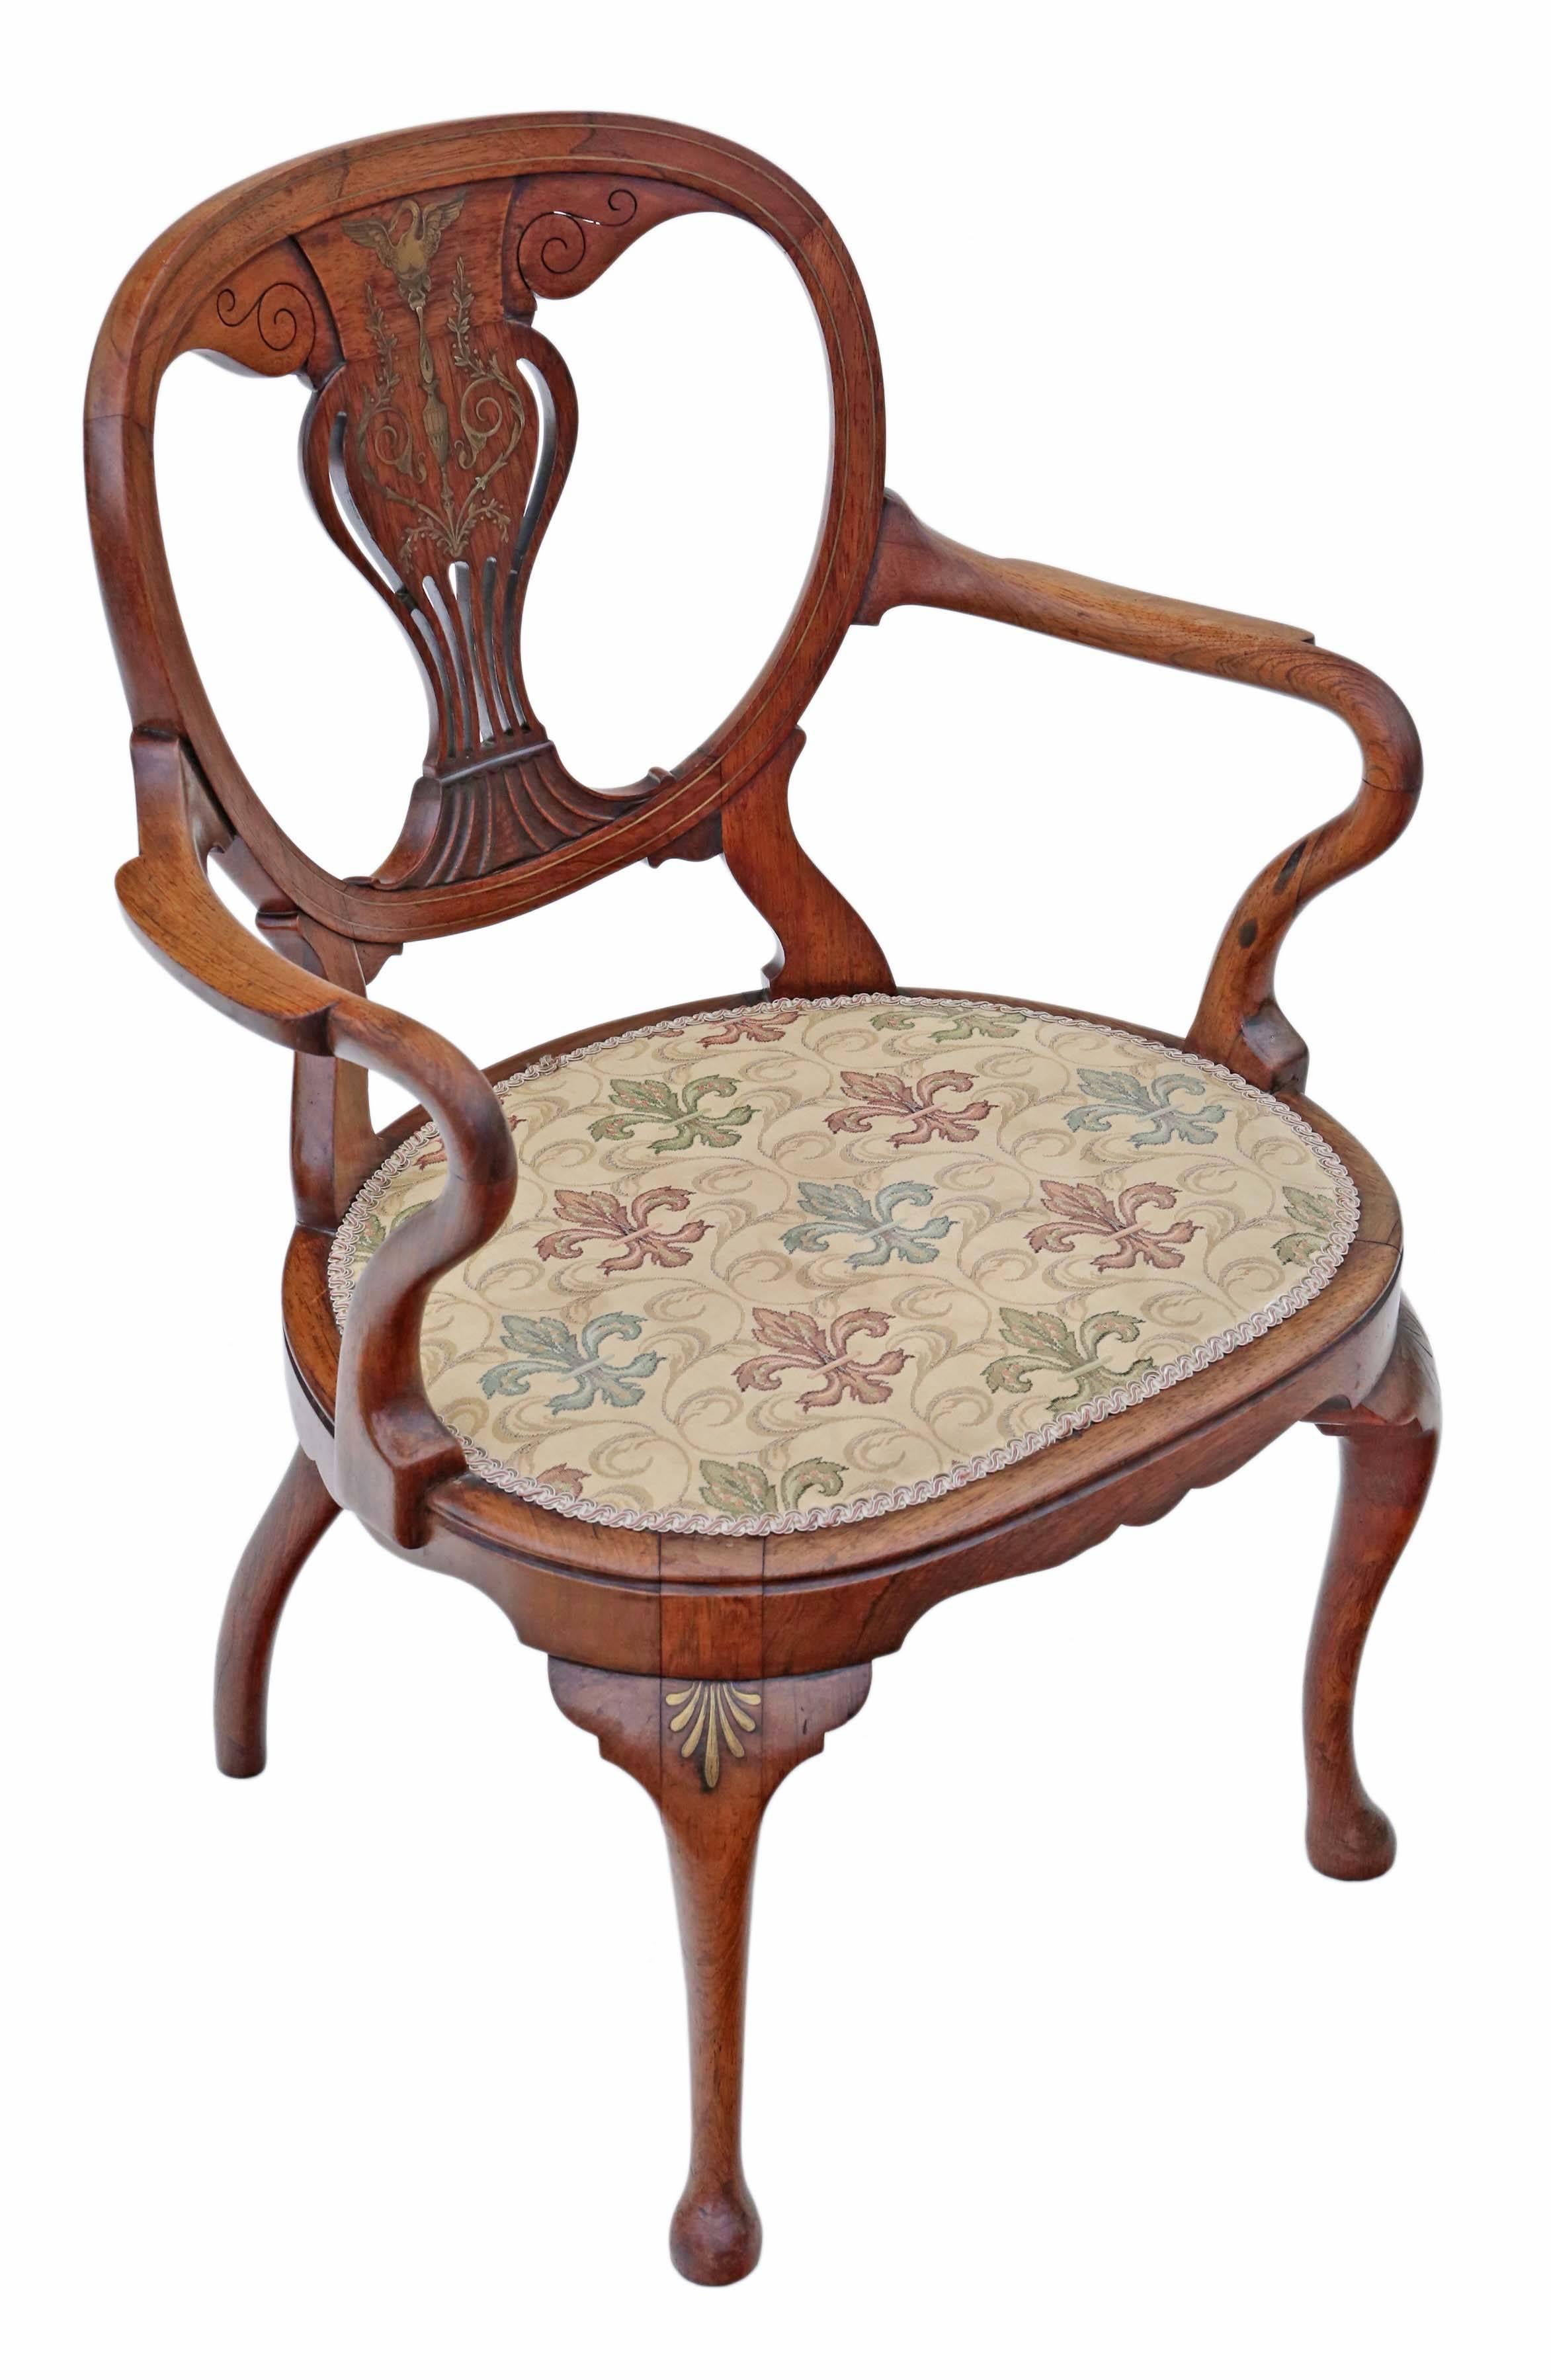 Antique Quality Brass Inlaid Rosewood Elbow Desk Chair Carver In Good Condition For Sale In Wisbech, Walton Wisbech